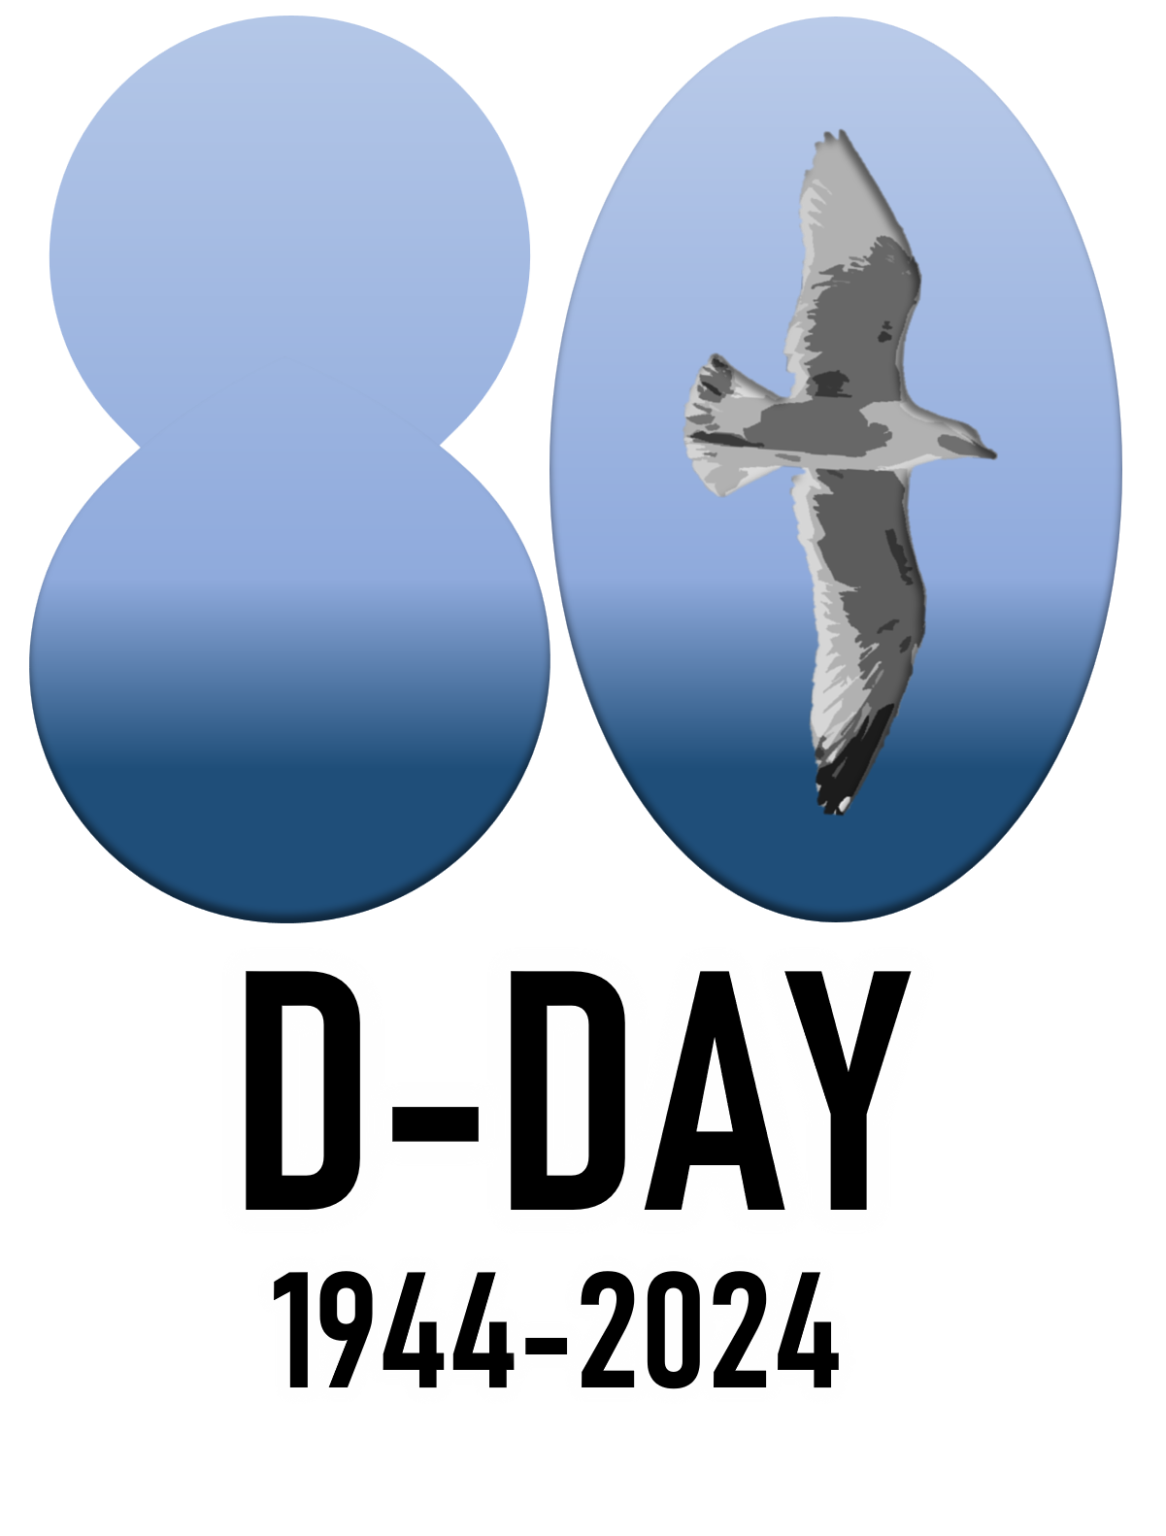 80th anniversary of DDay Commemorations 2024 of the Normandy landings